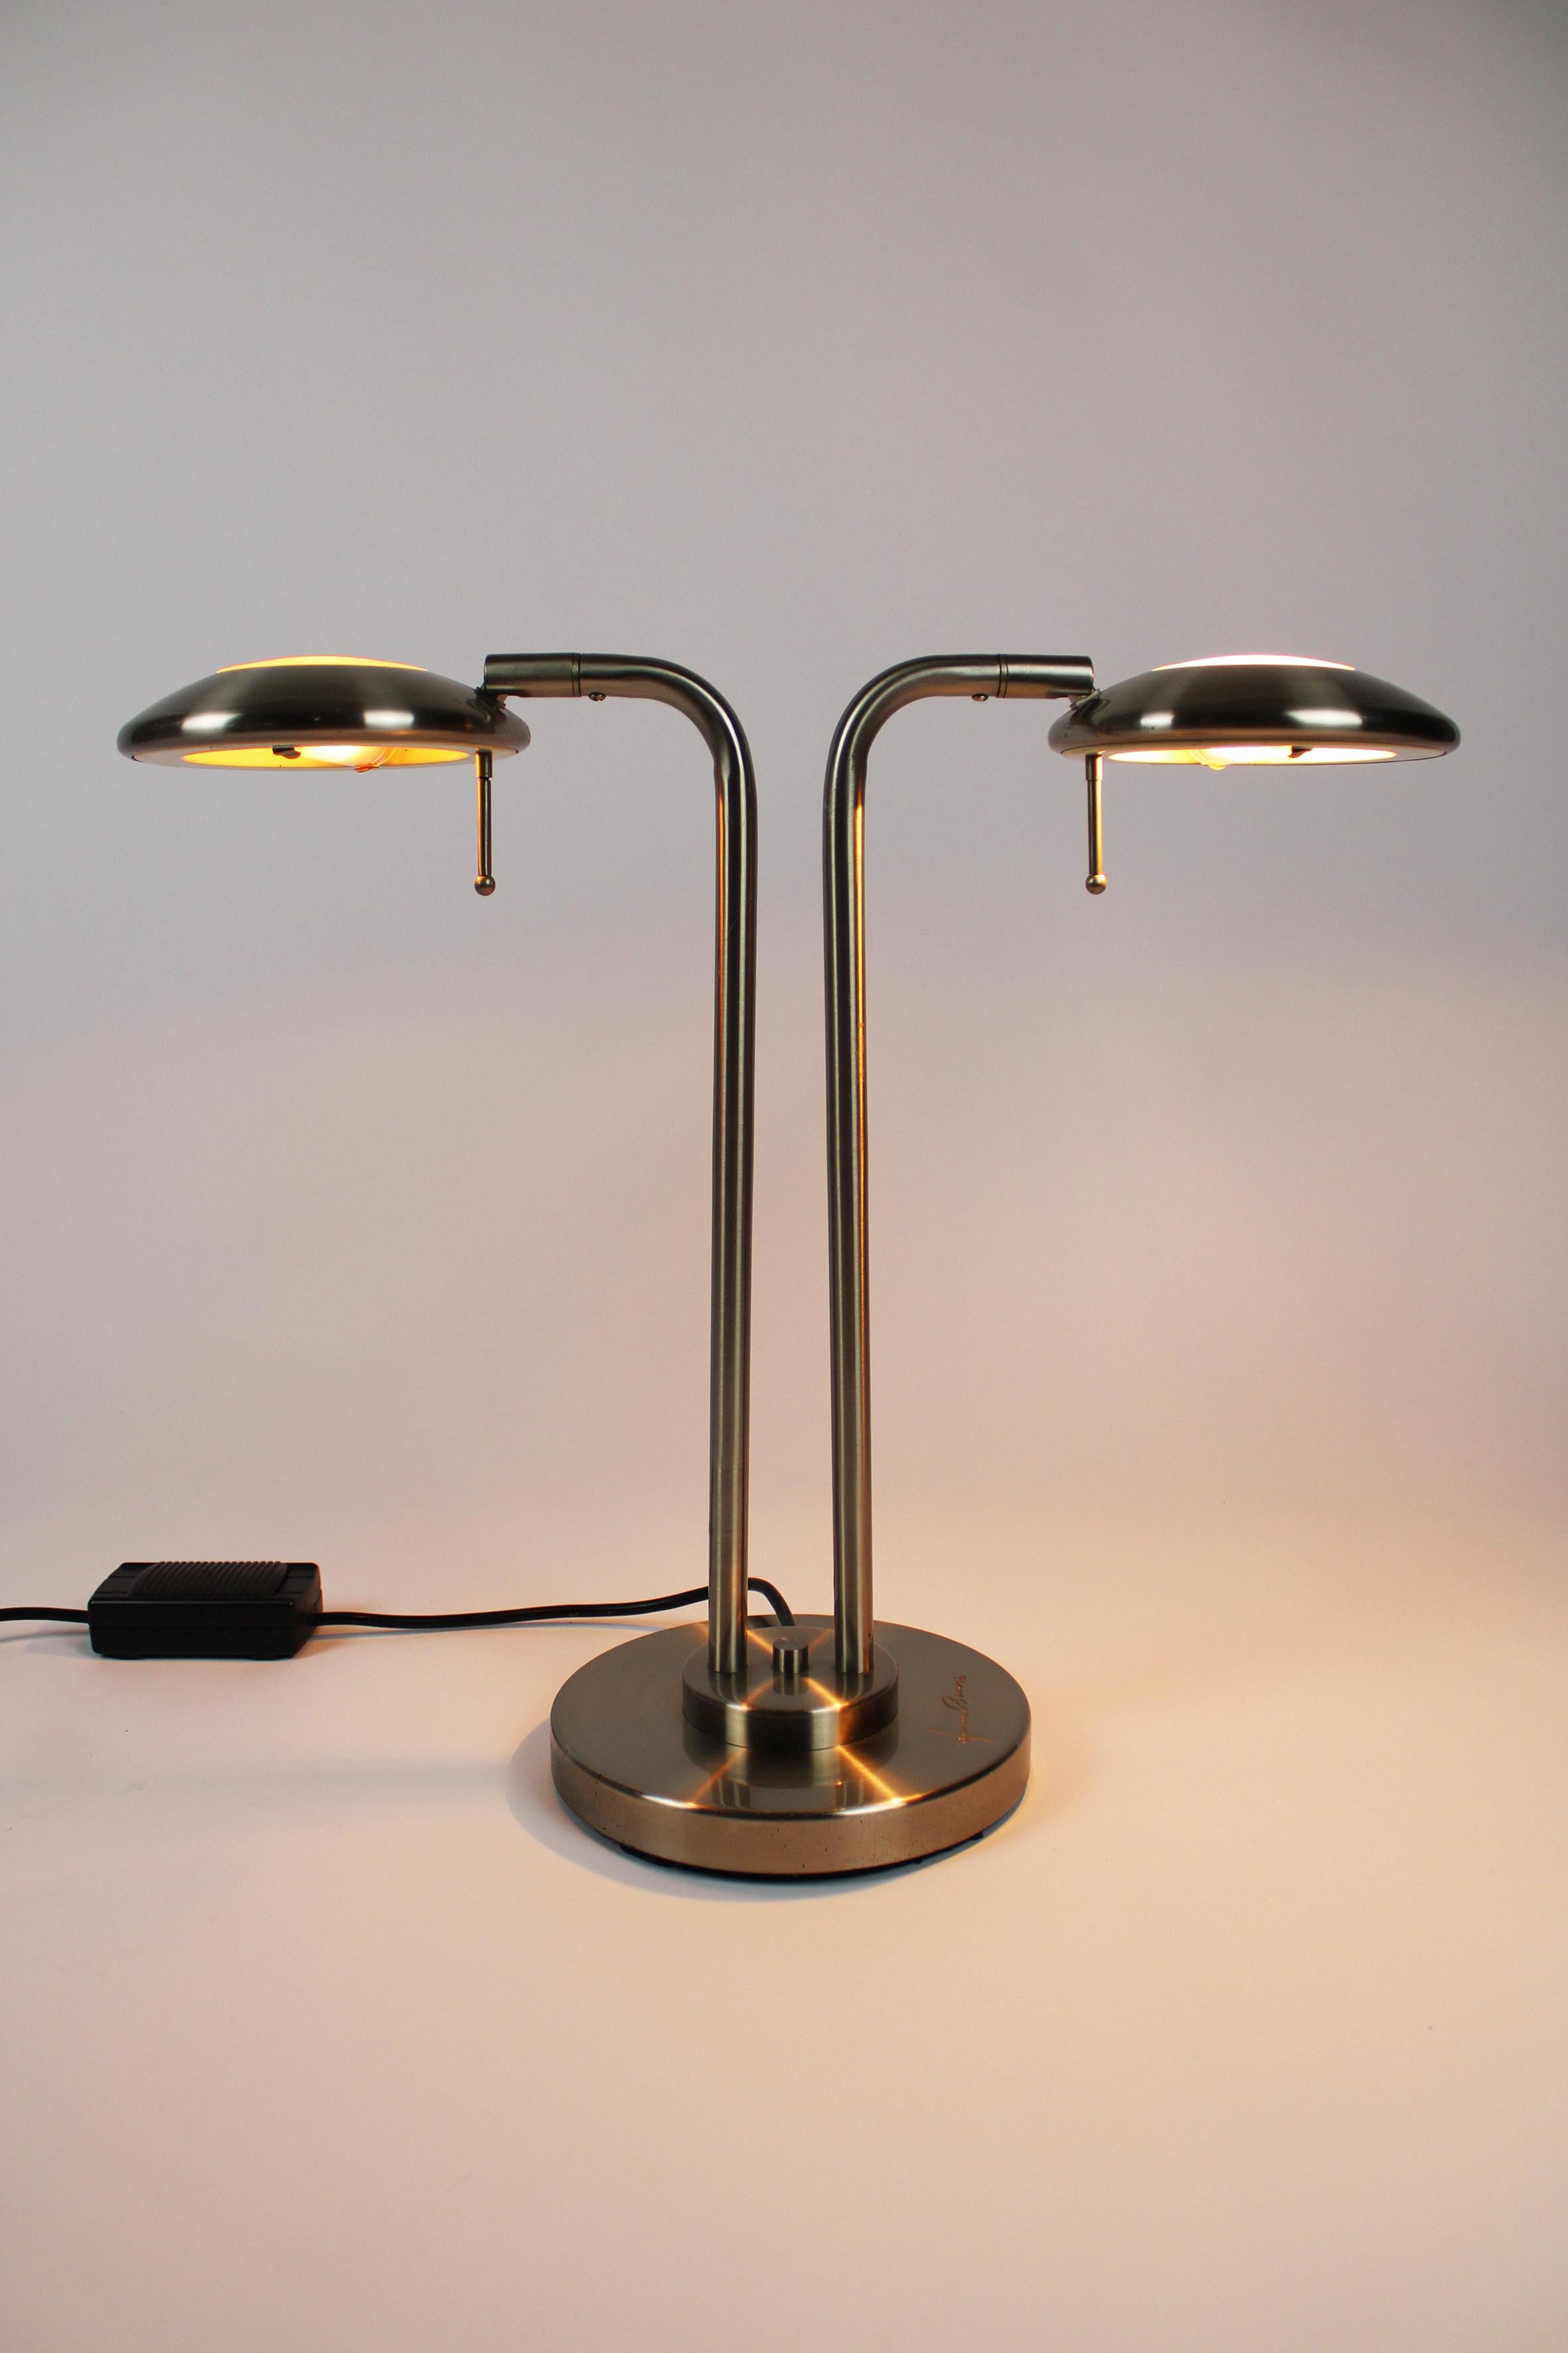 Transform your living space with this dynamic adjustable desk or table lamp, a delightful addition to your interior. With dual-sided flexibility, you have the freedom to rotate the lamp shades as you please. Crafted by Jan des Bouvrie, a